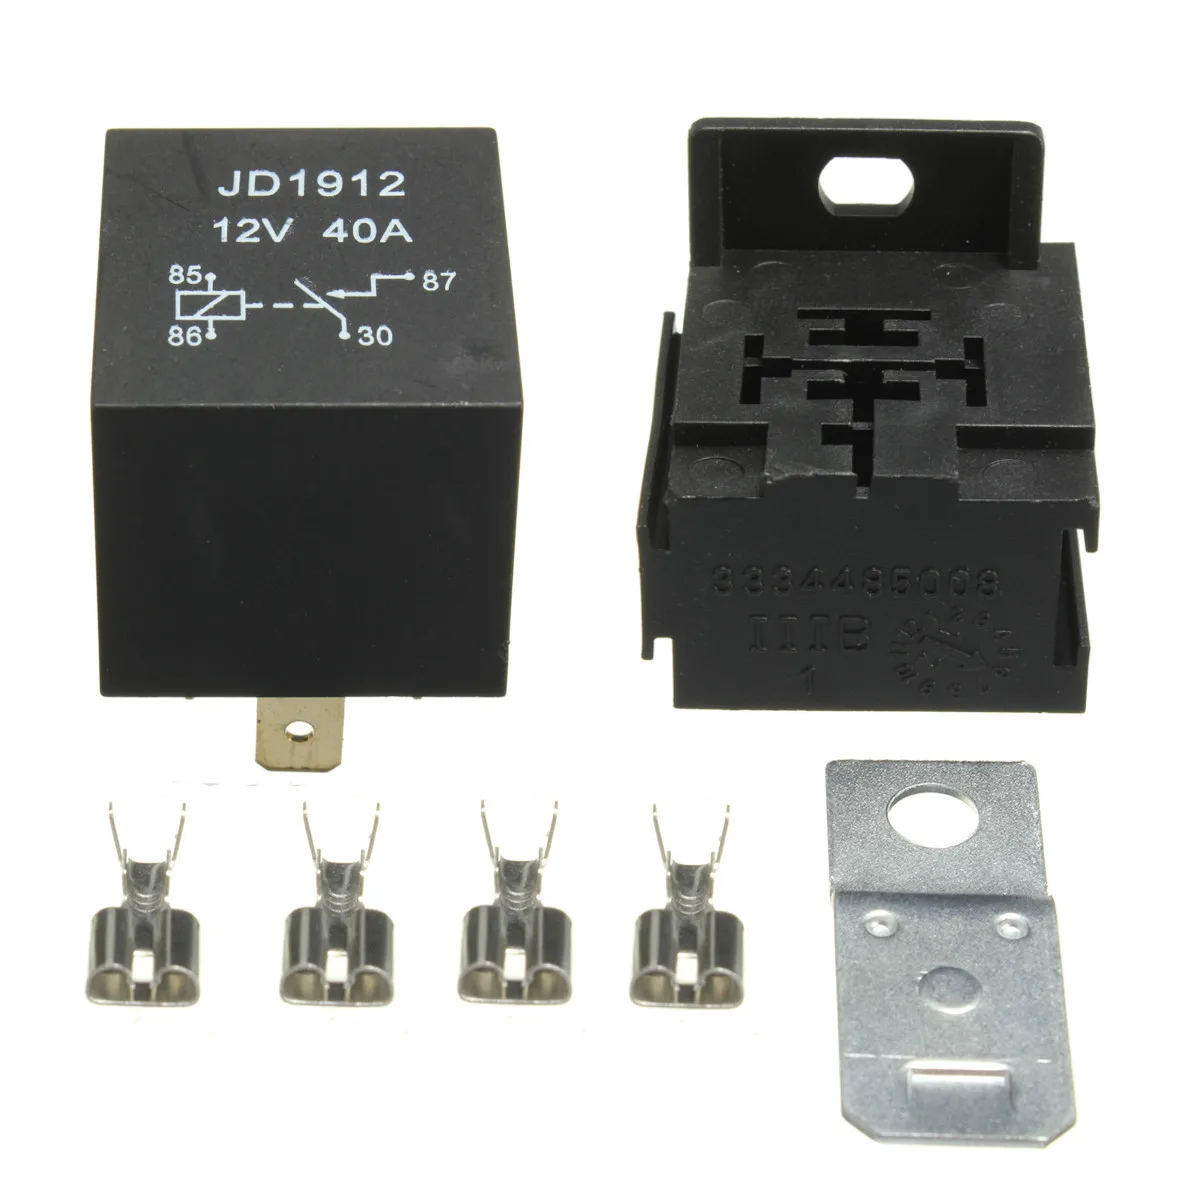 

40A AMP 12V 4 Pin Relay Socket Base Terminals for Car Van Motorcycle Boat Switches & Relays